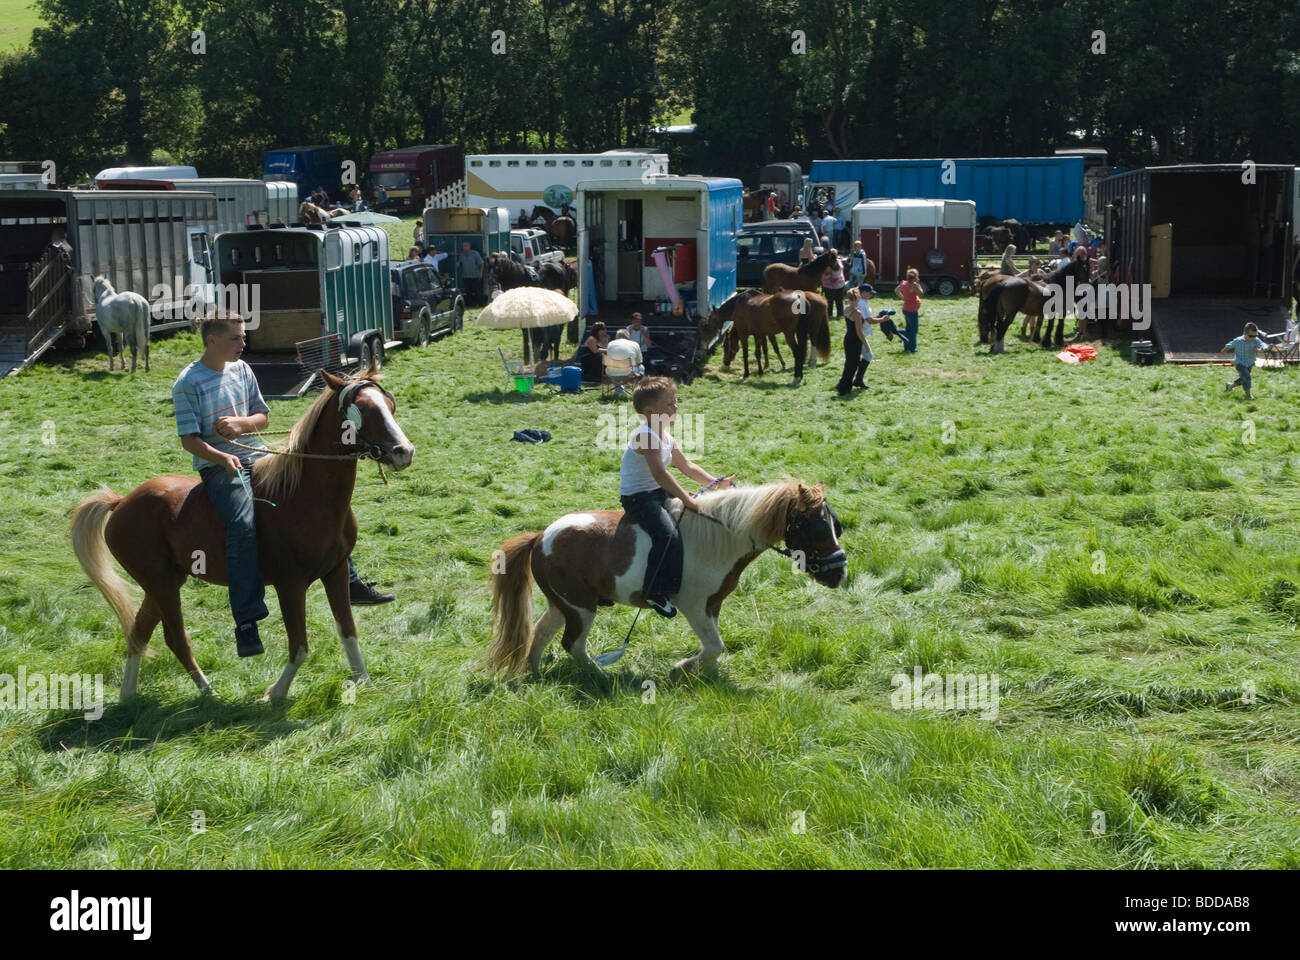 Priddy Horse Fair Mendip Hills, Somerset Uk  Young boys  horse riding  Shetland Pony the horses are for sale 2000s HOMER SYKES Stock Photo